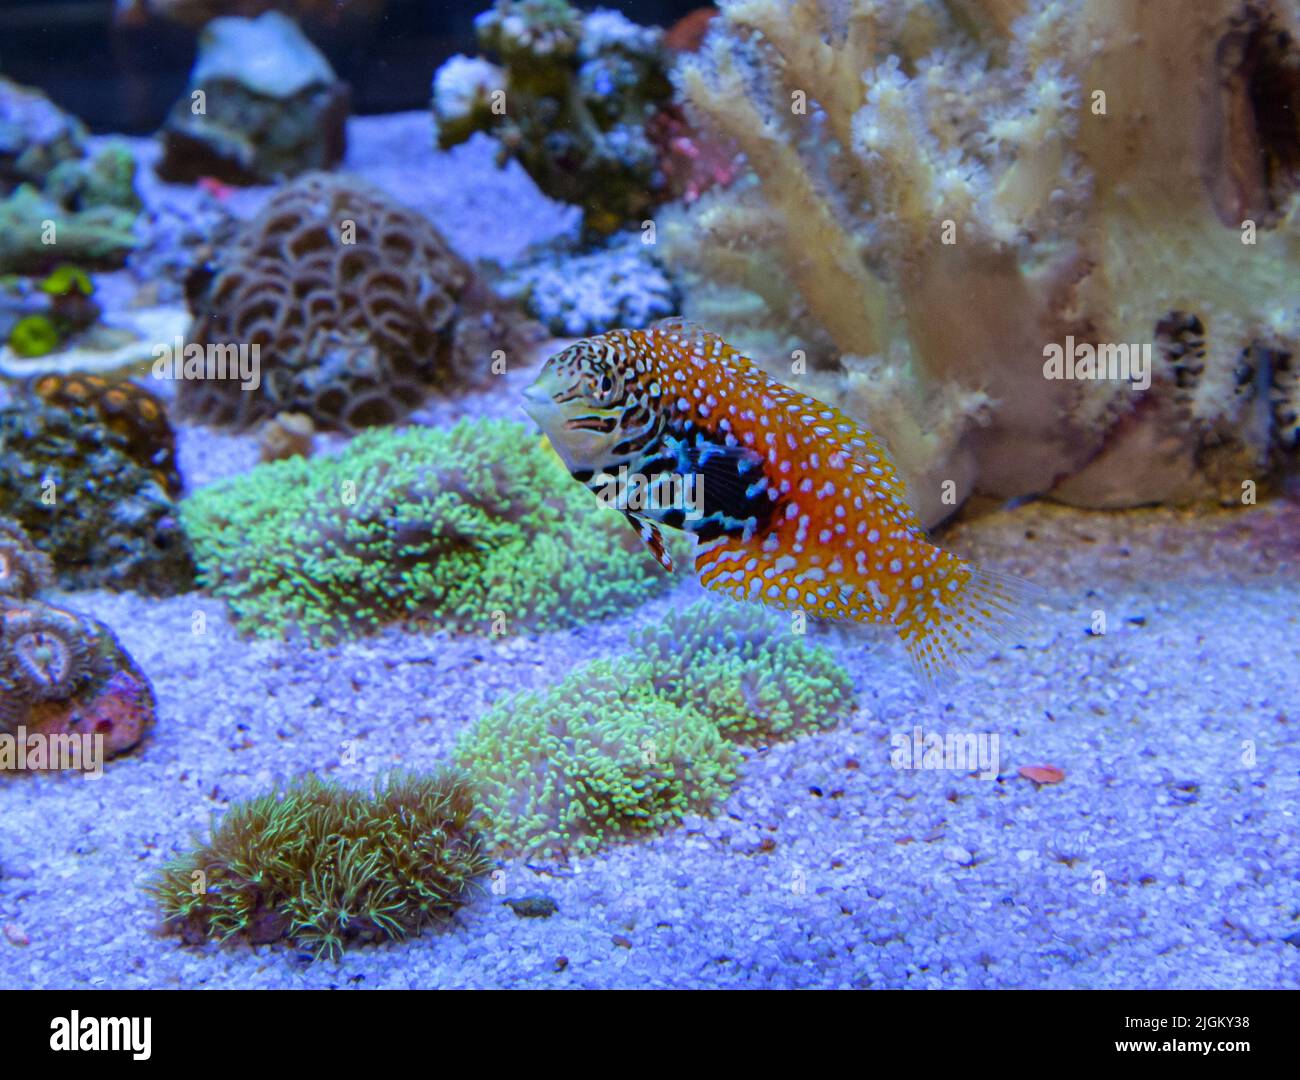 Marine fish leopard wrasse swimming between corals. Stock Photo